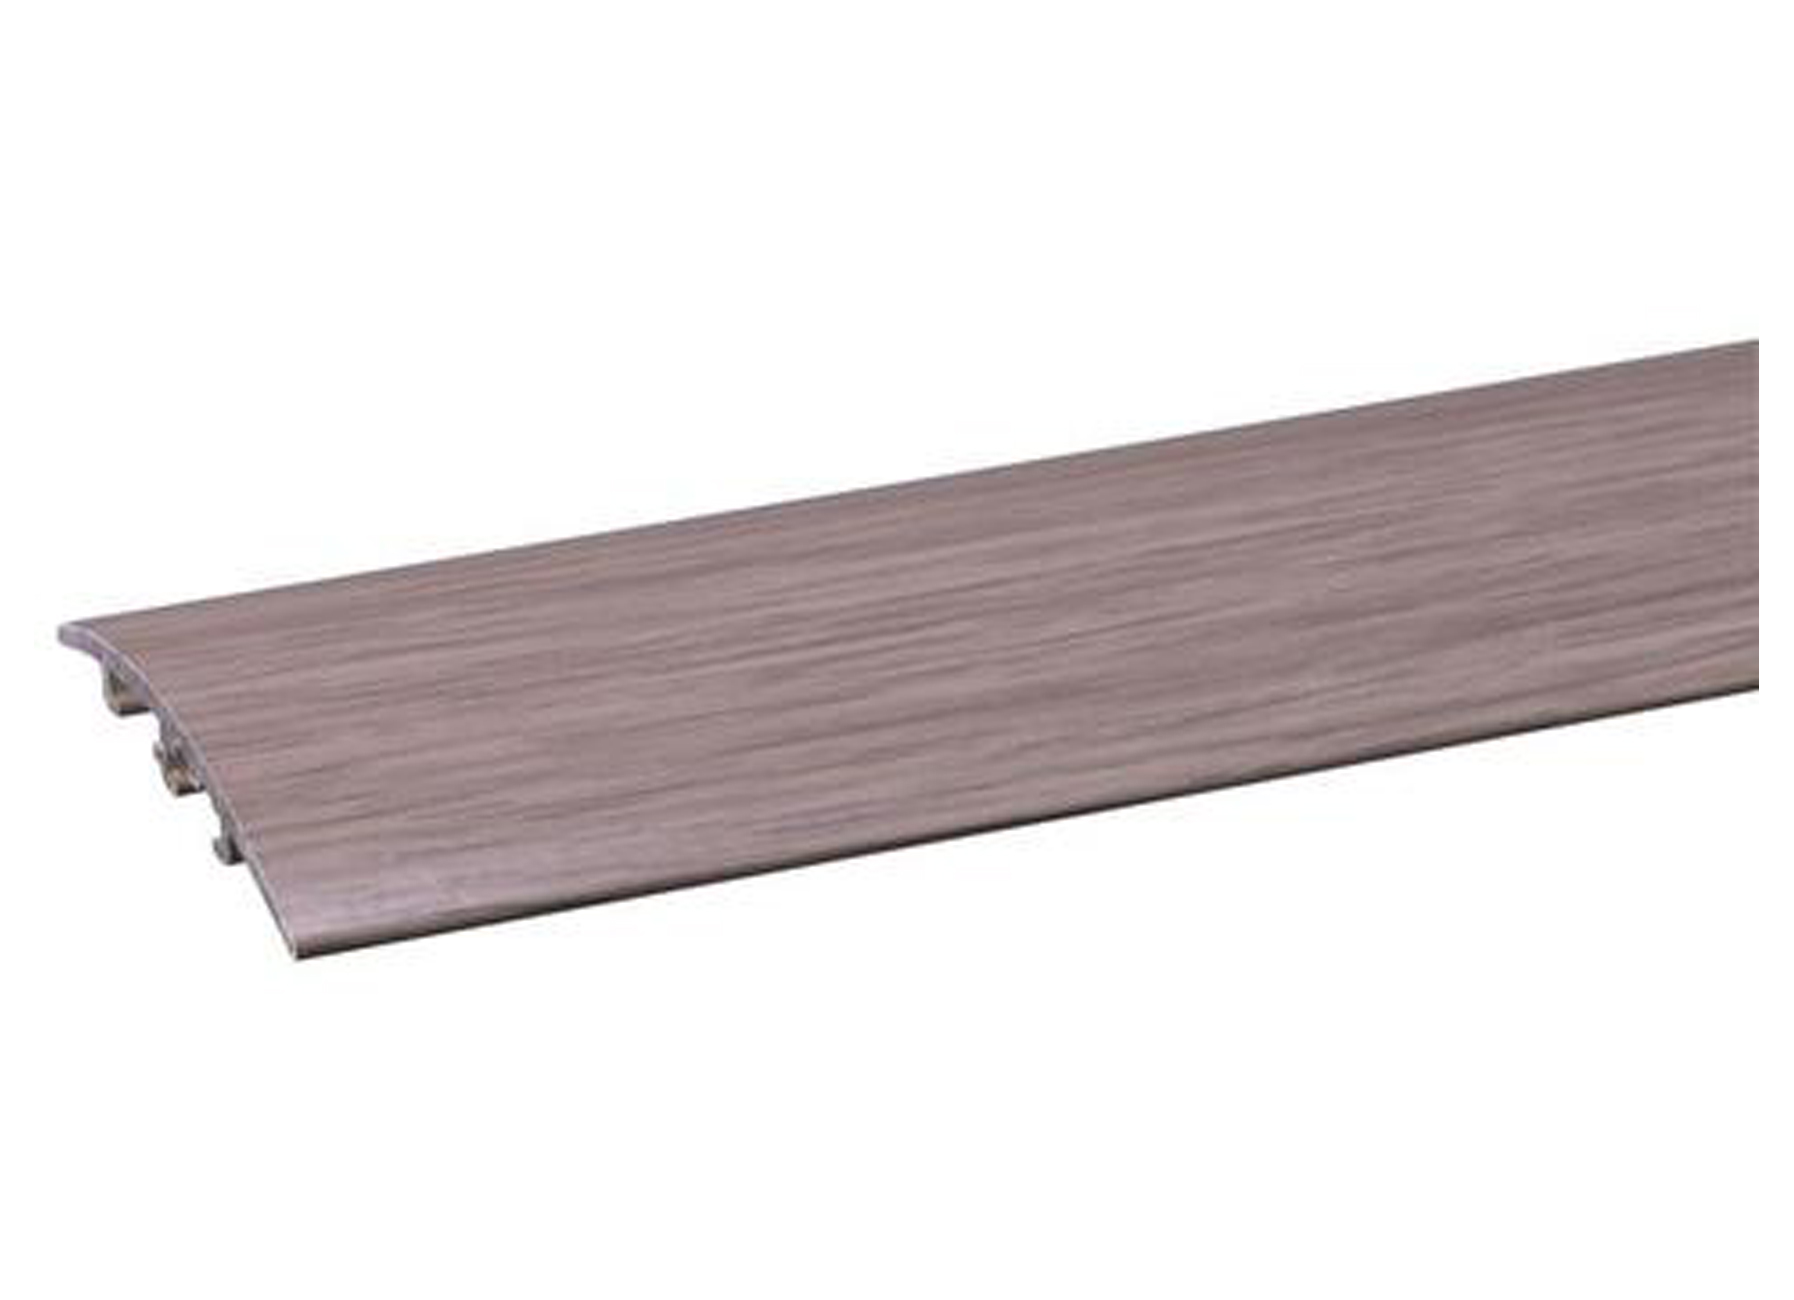 JEWE BARRE DE SEUIL RATTRAPAGE 47MM CHENE GRIS 190CM